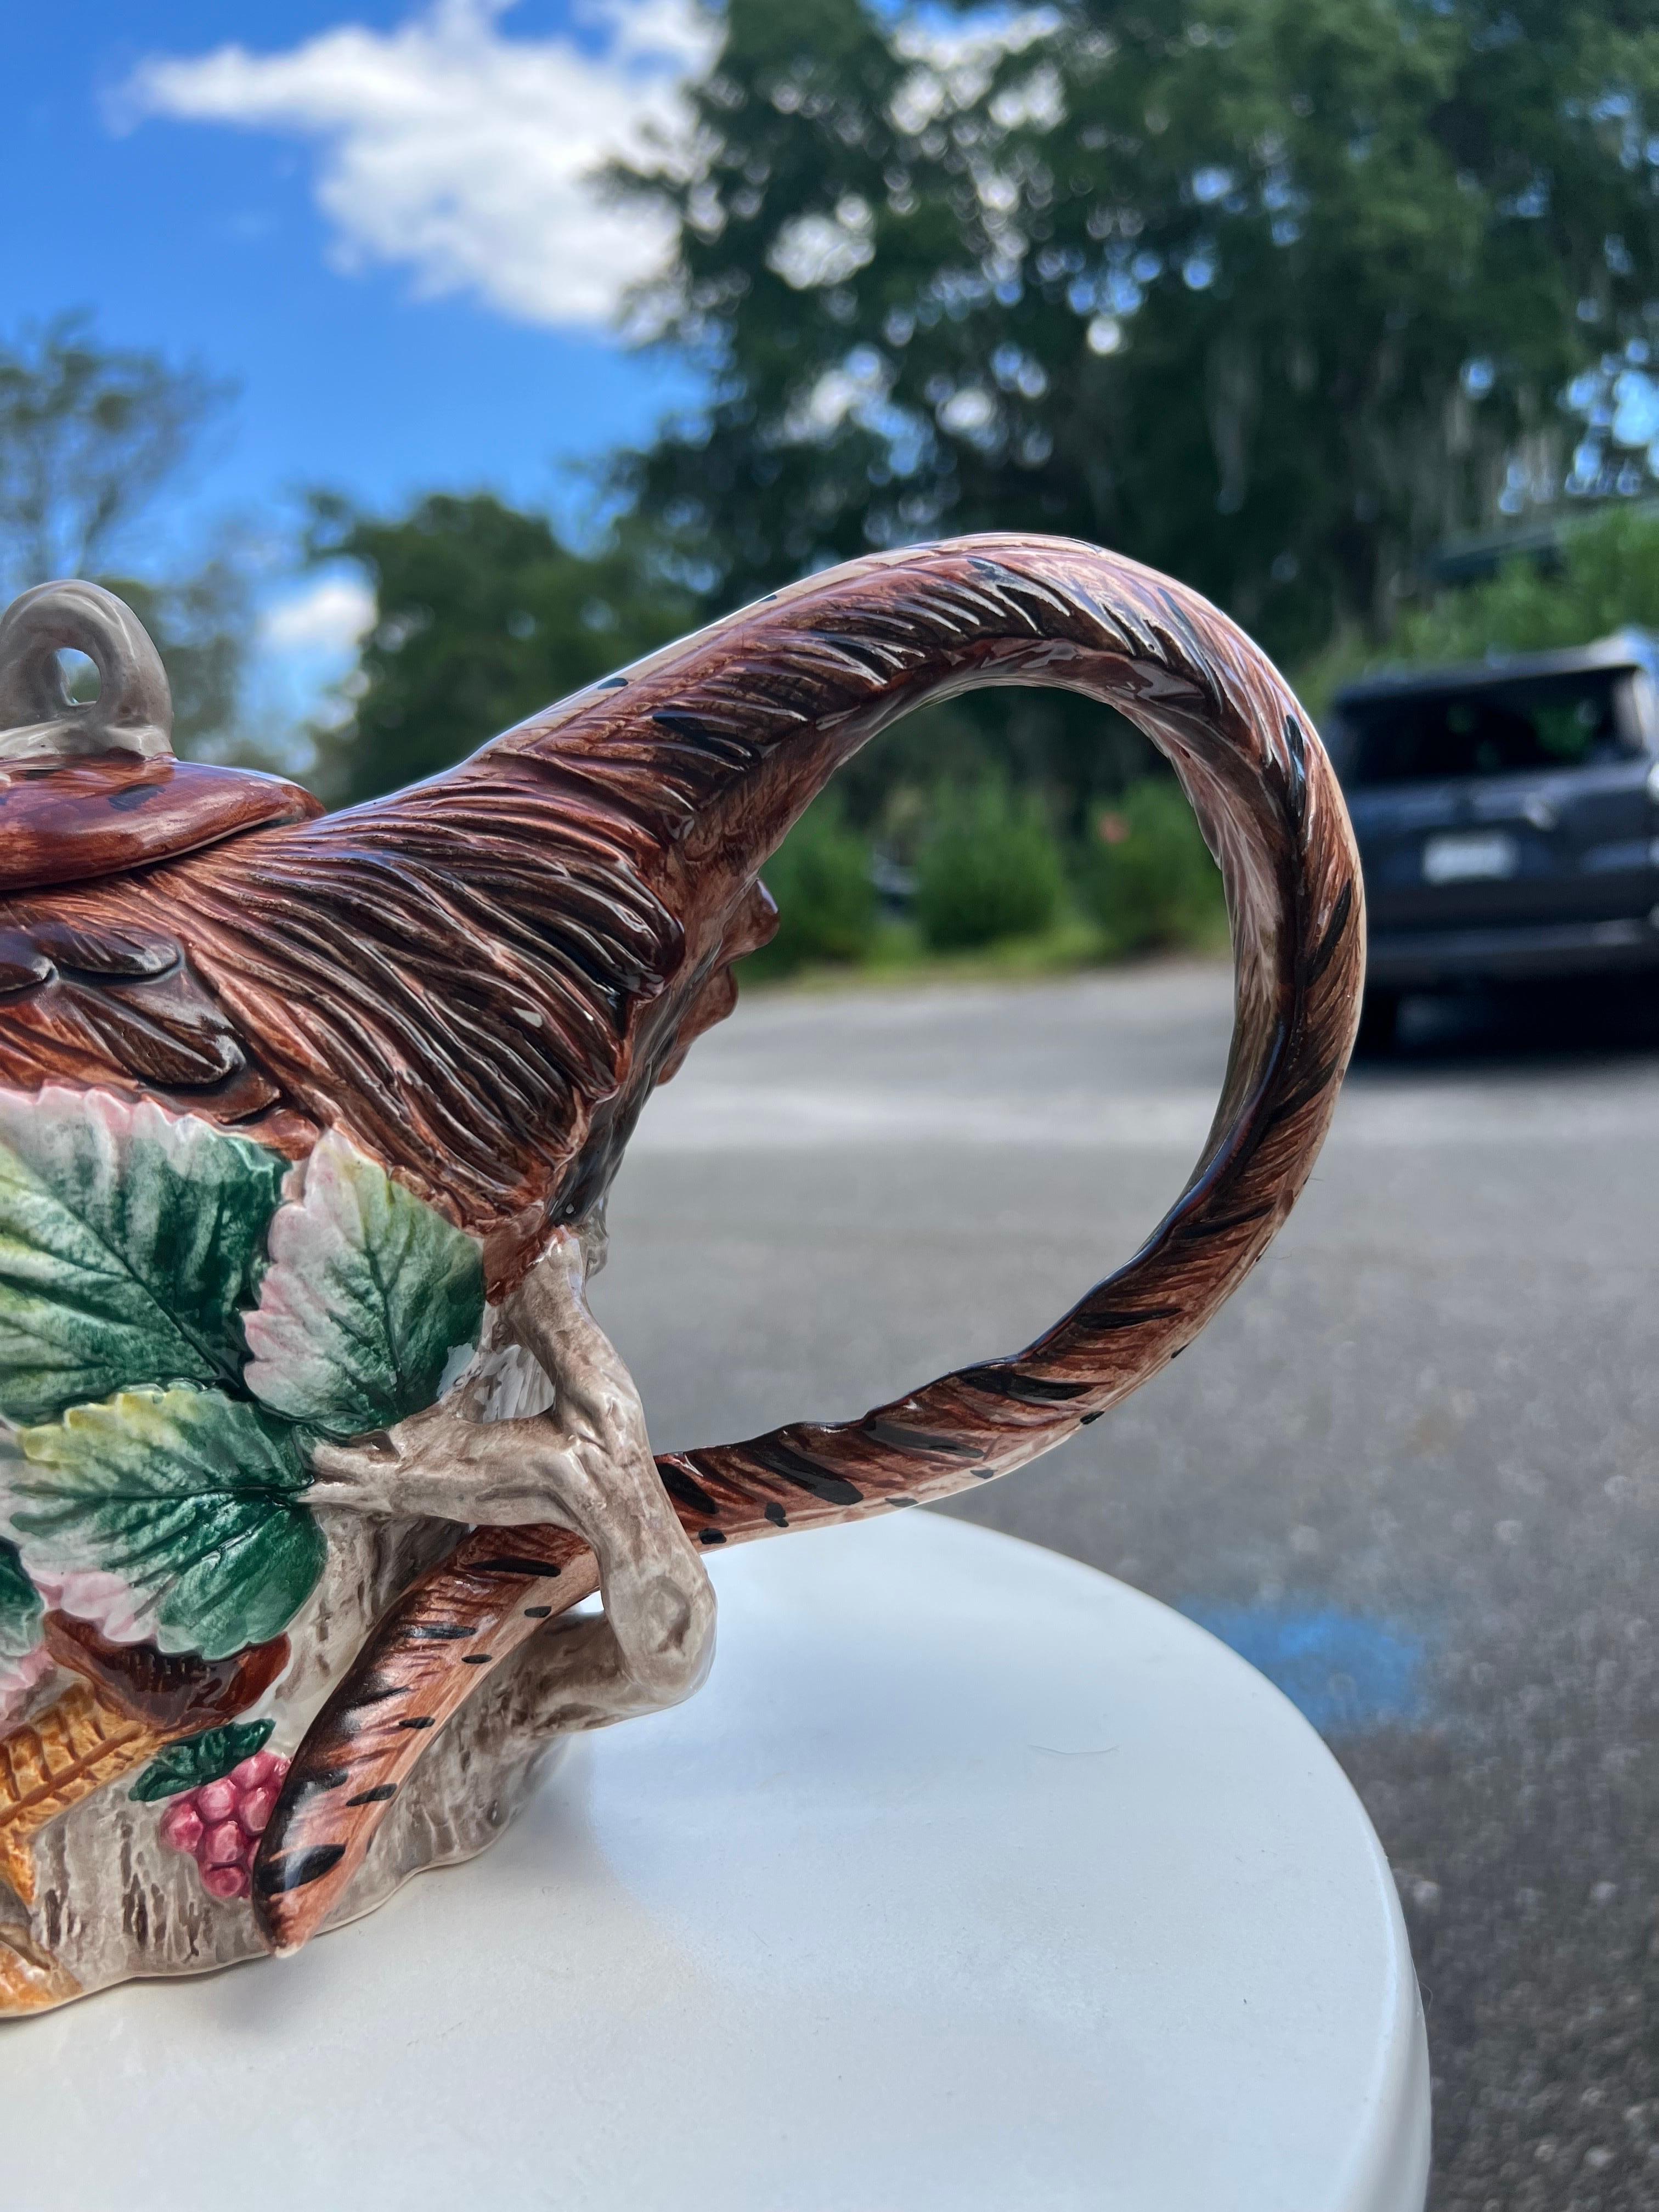 This is a Fitz and Floyd  28 oz teapot in the shape of a pheasant. It is dated 1990 and retains the original price sticker, Fitz and Floyd Sticker and a Hand Painted sticker.  It has a clever design with the spout being the pheasants beak and the